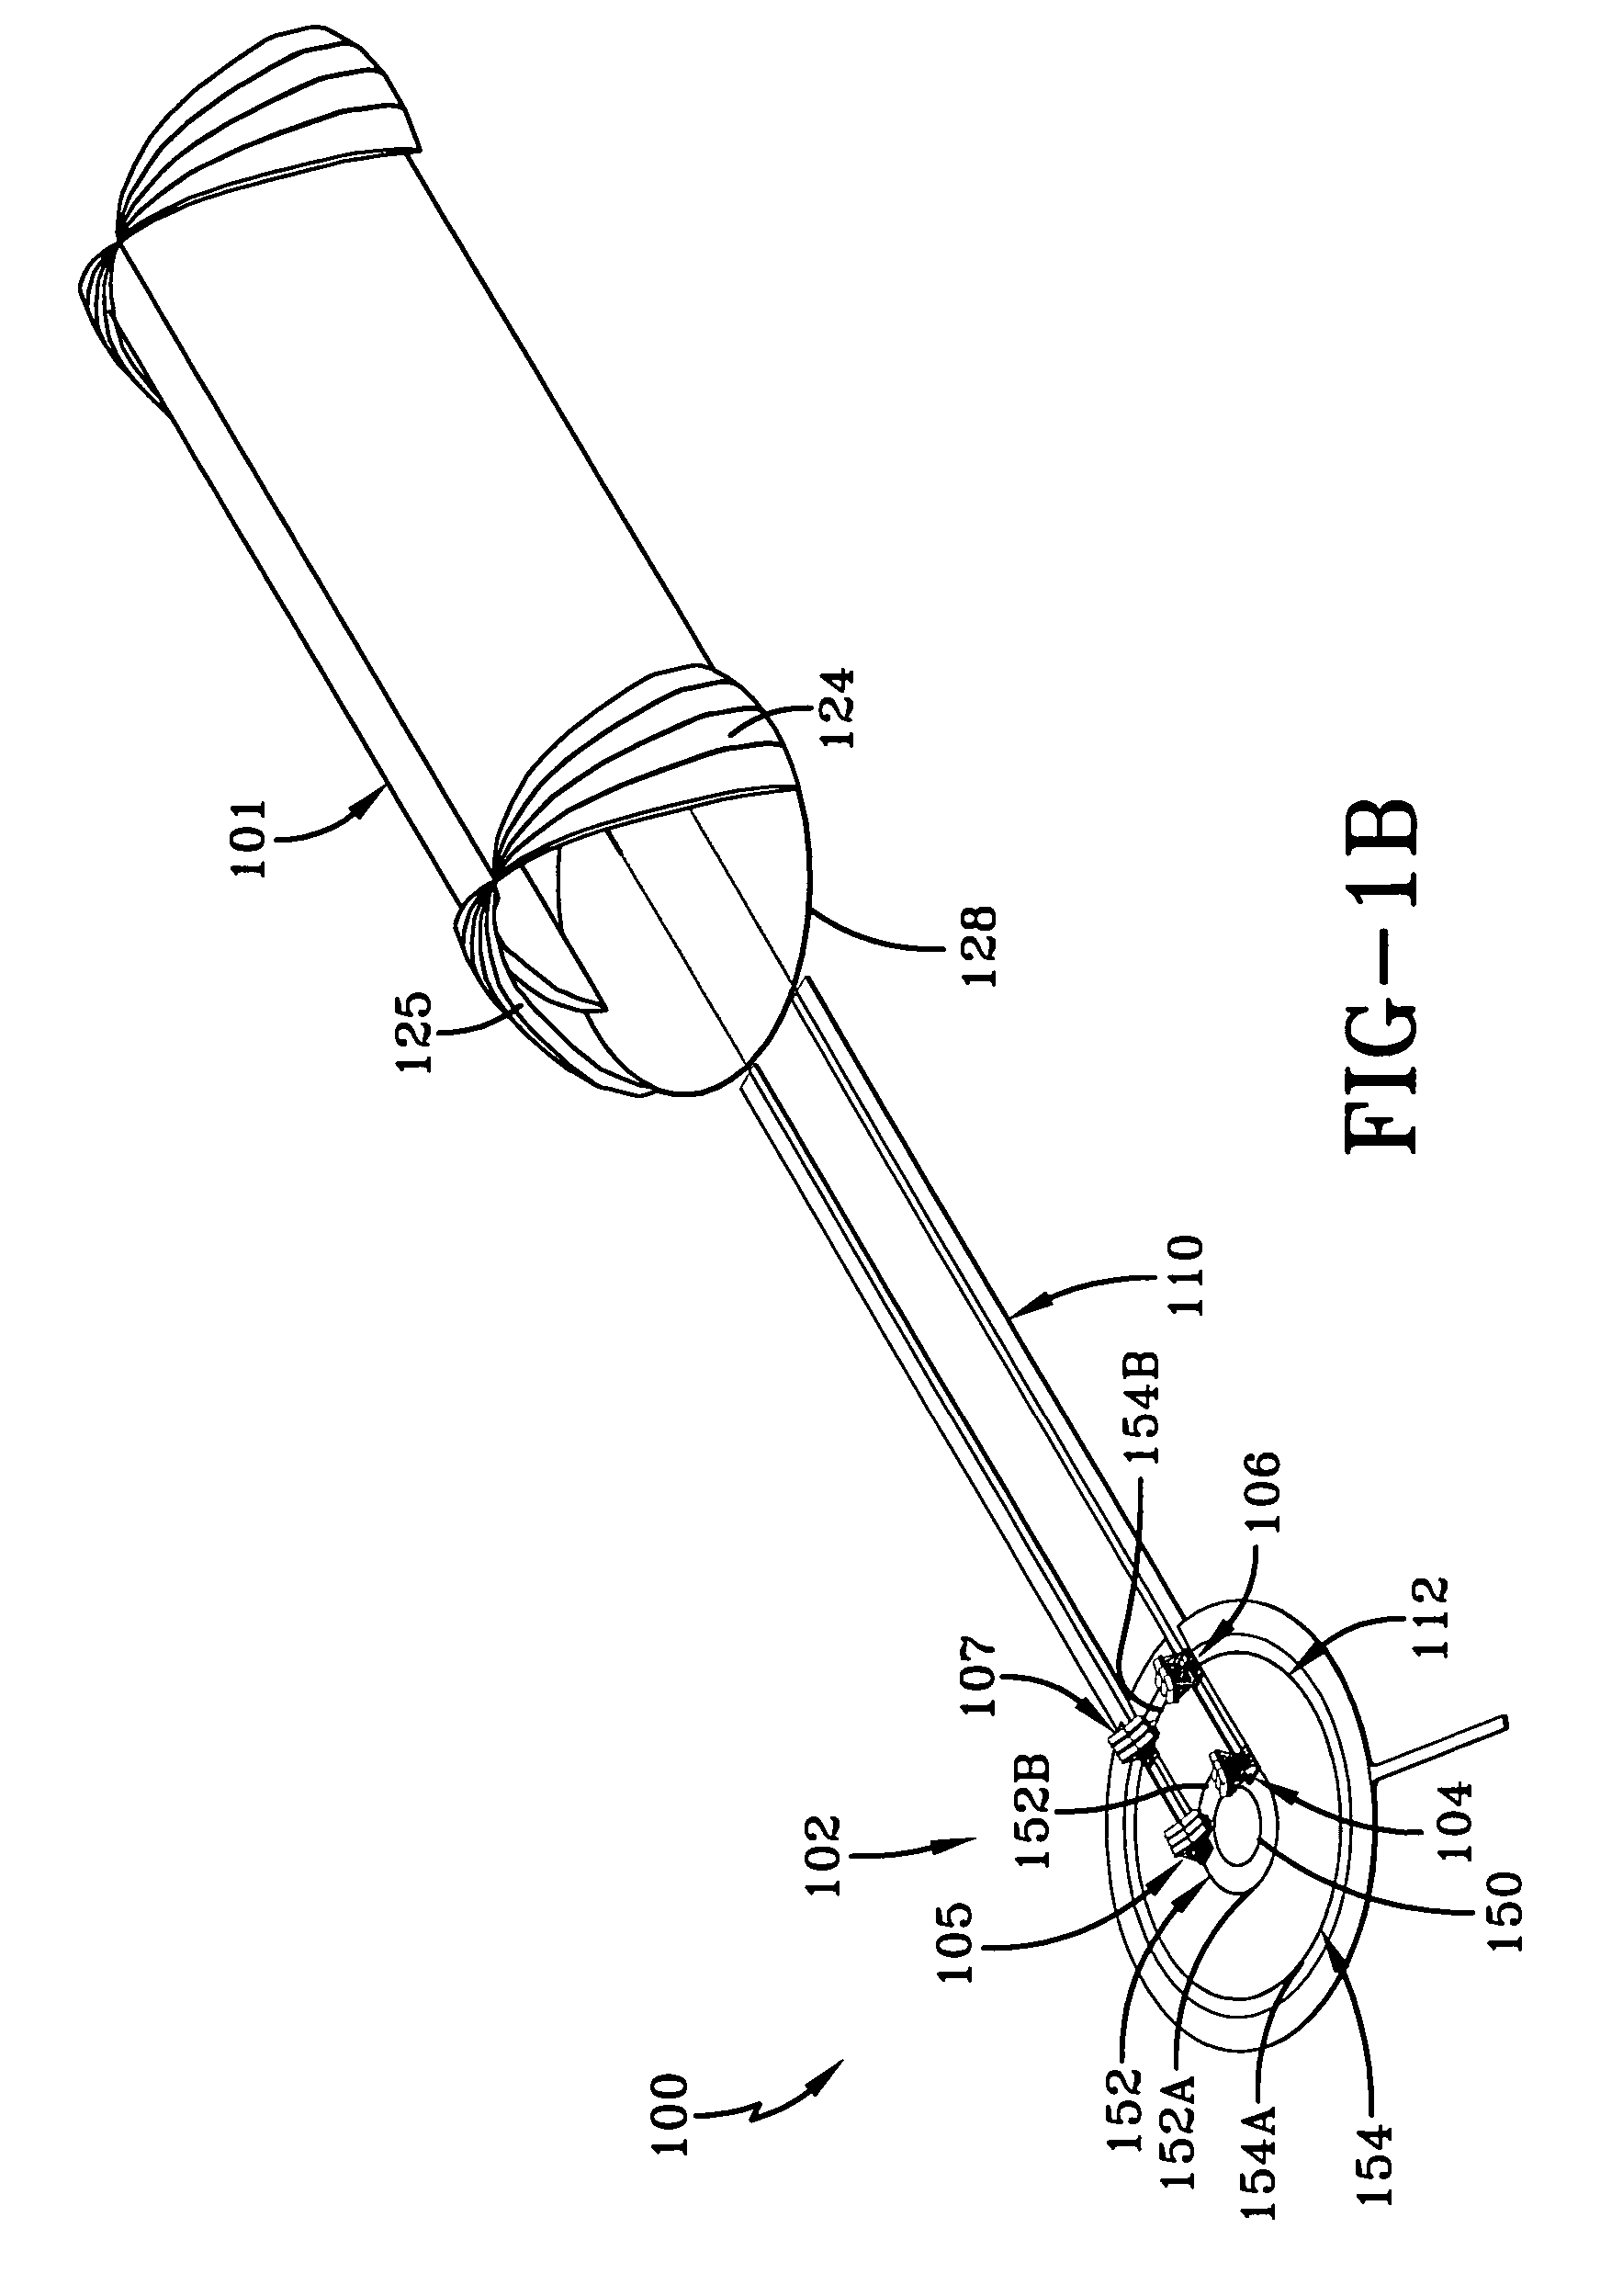 Ground handling system for an airship